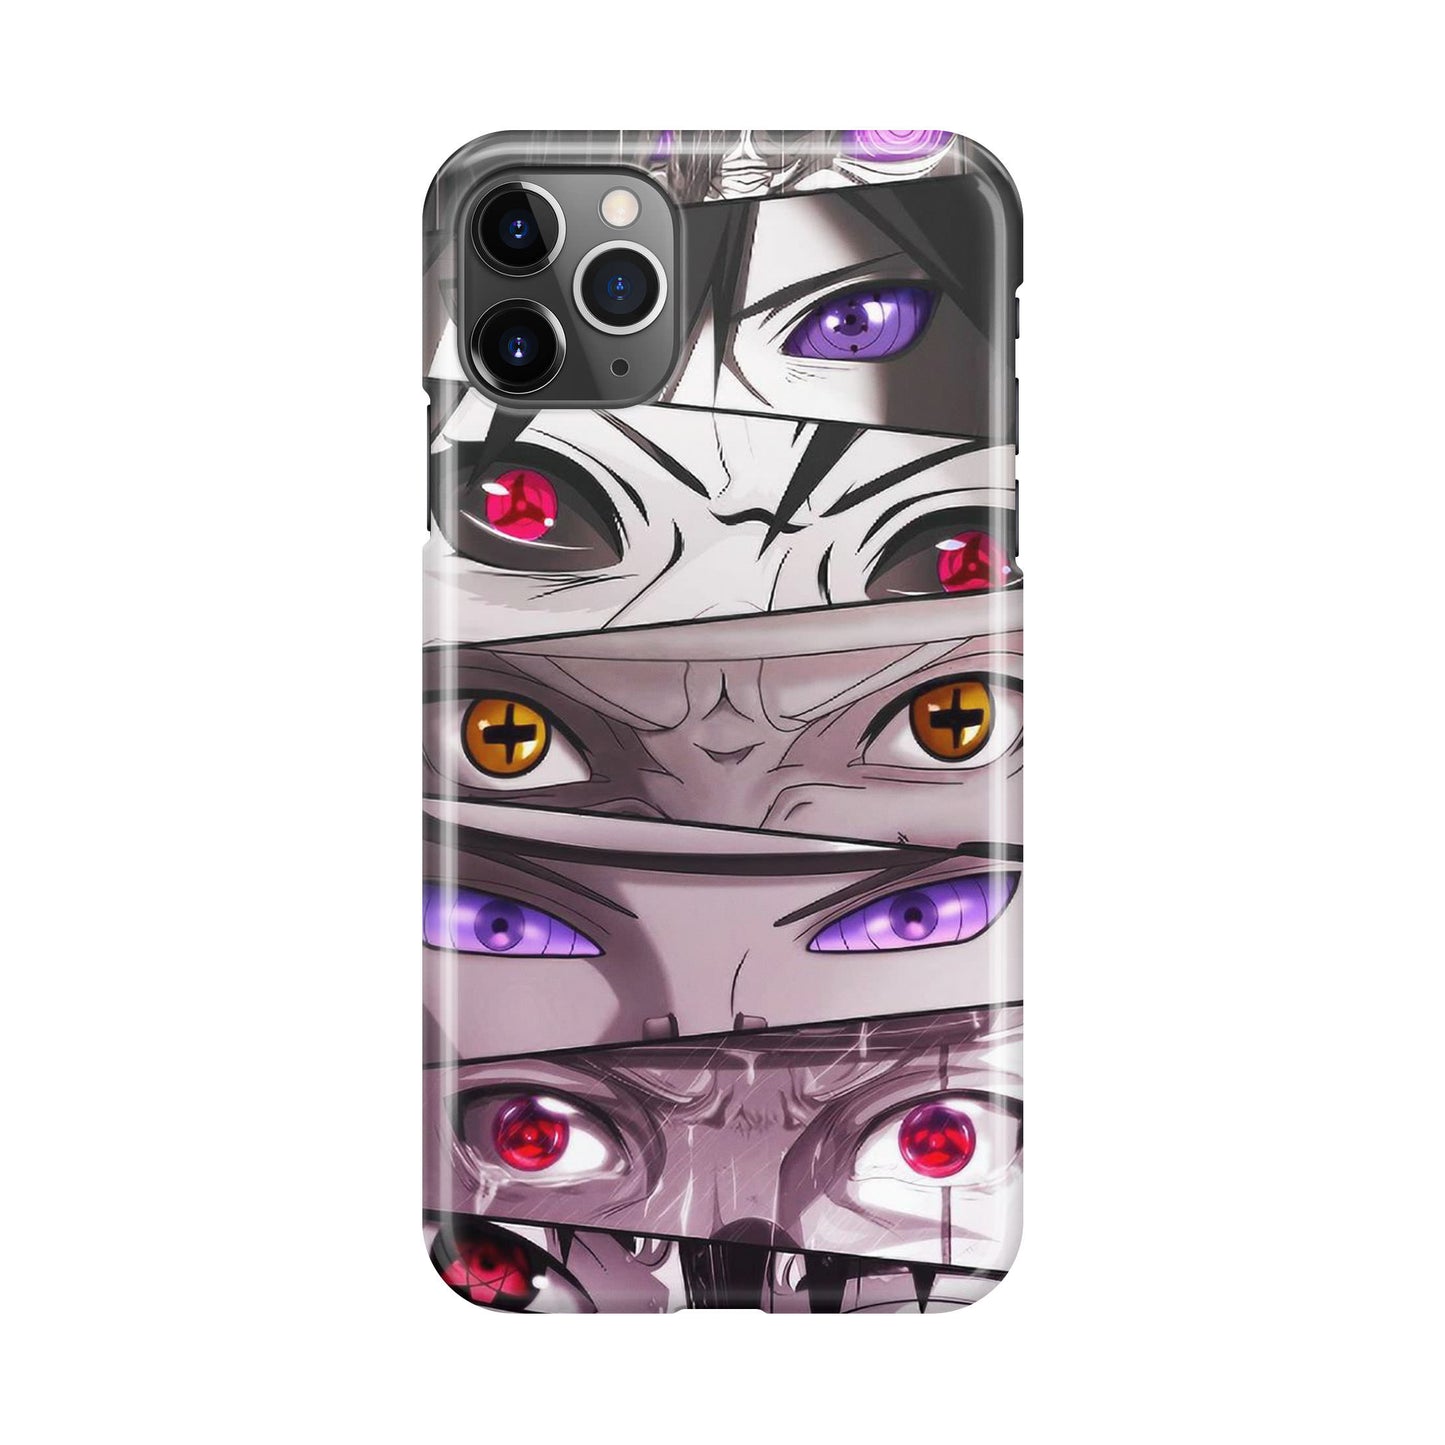 The Powerful Eyes iPhone 11 Pro Case